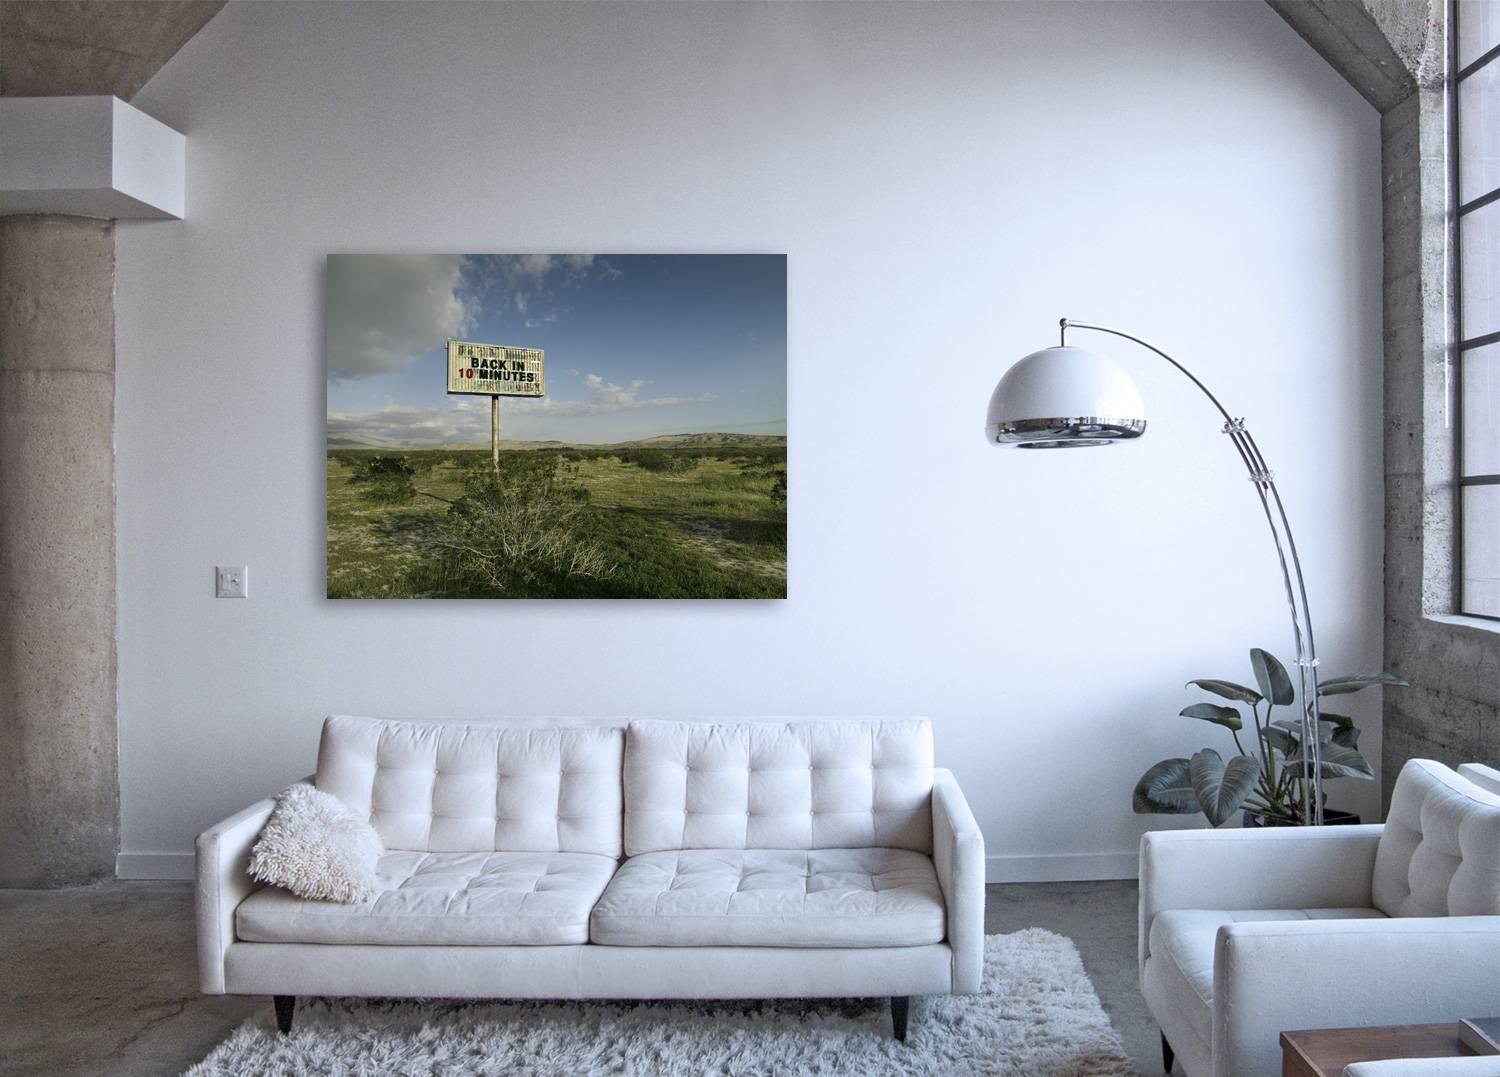 Back in 10 - large format photograph of conceptual message sign in landscape - Conceptual Photograph by Frank Schott